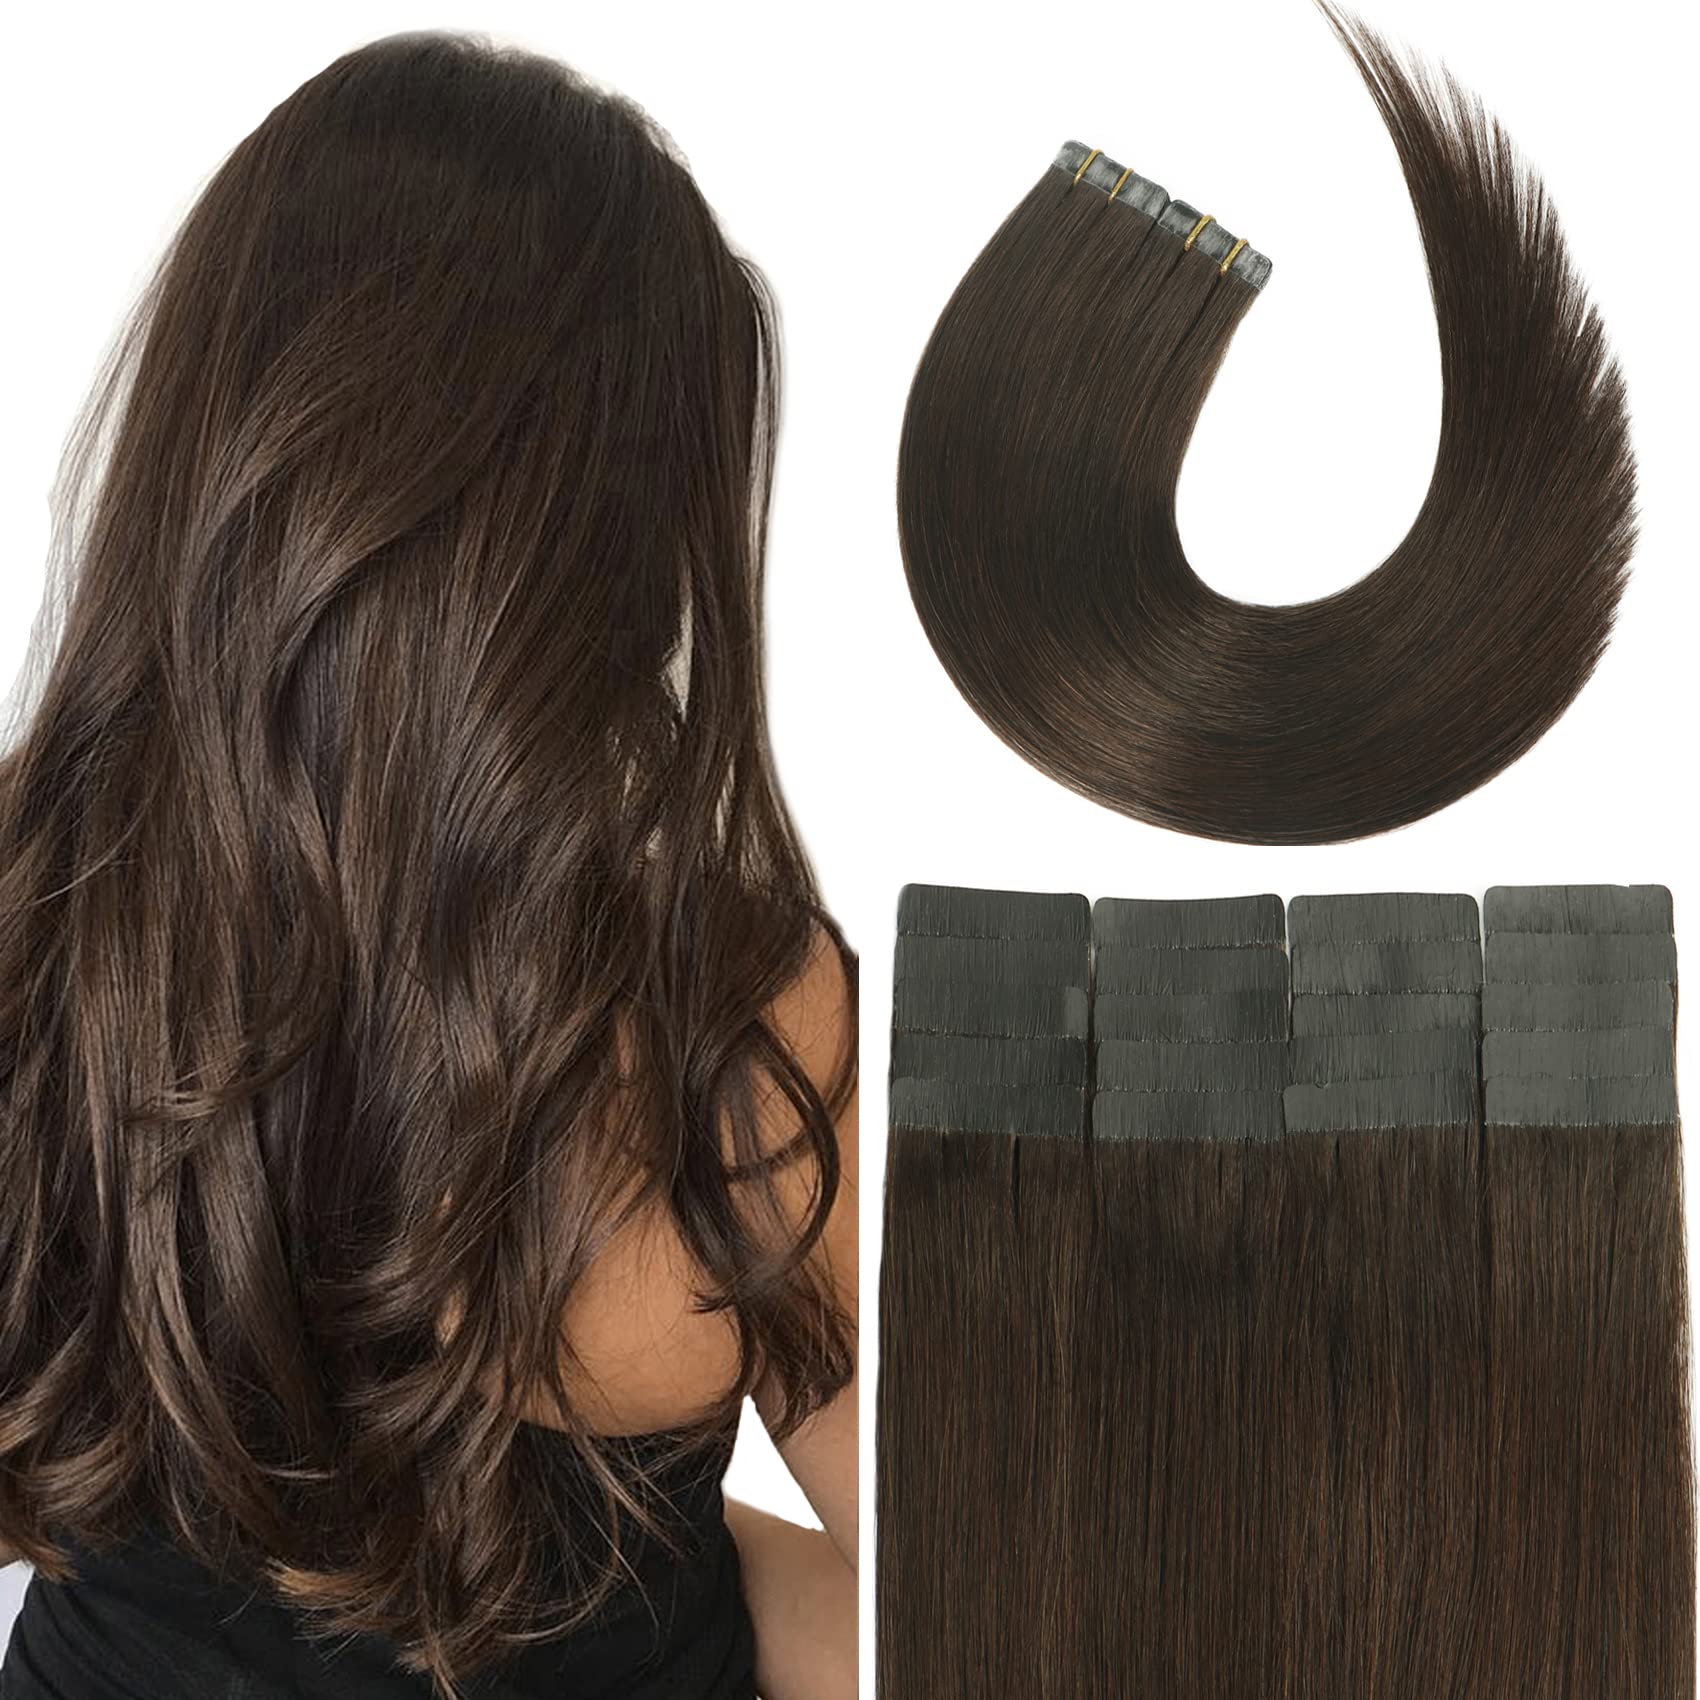 Tape in Hair Extensions 2 Dark Brown 100 Remy Human Hair Extensions Silky  Straight for Fashion Women 20 PcsPackage(18Inch 2 40g) 18 Inch 2 Dark brown